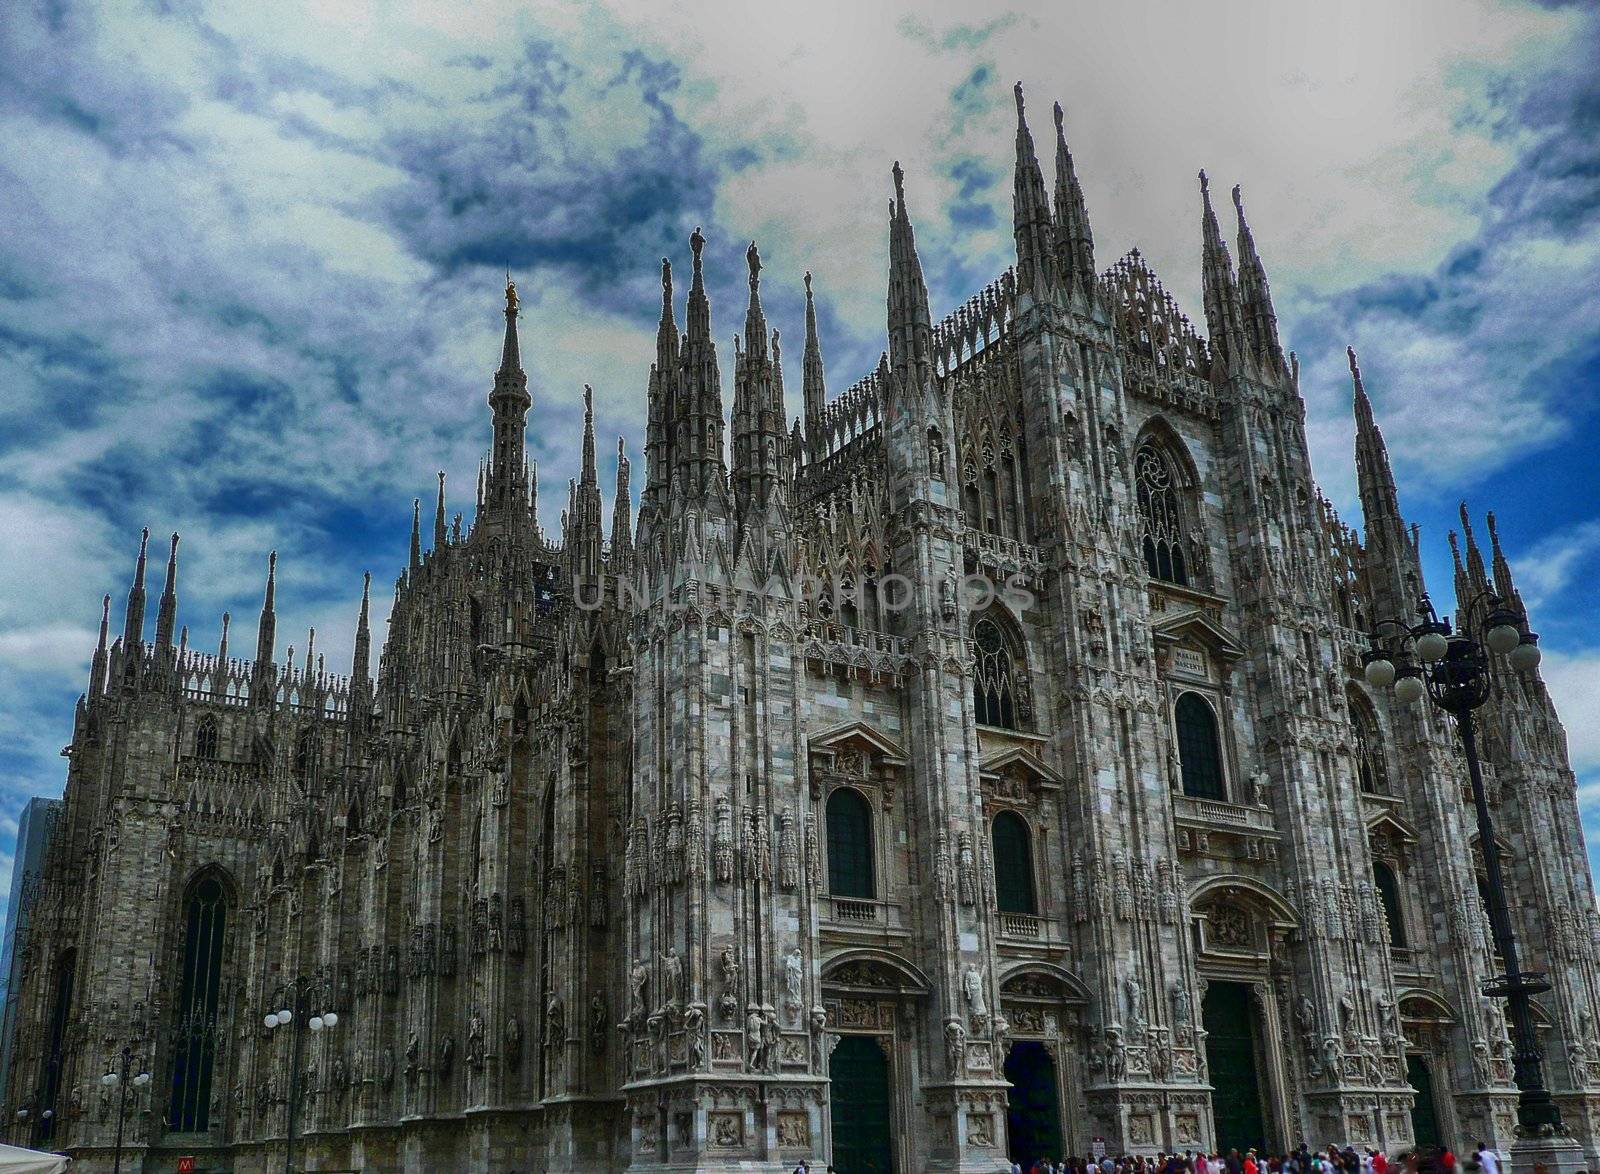 Milan Cathedral against a scenic cloudy sky, Italy